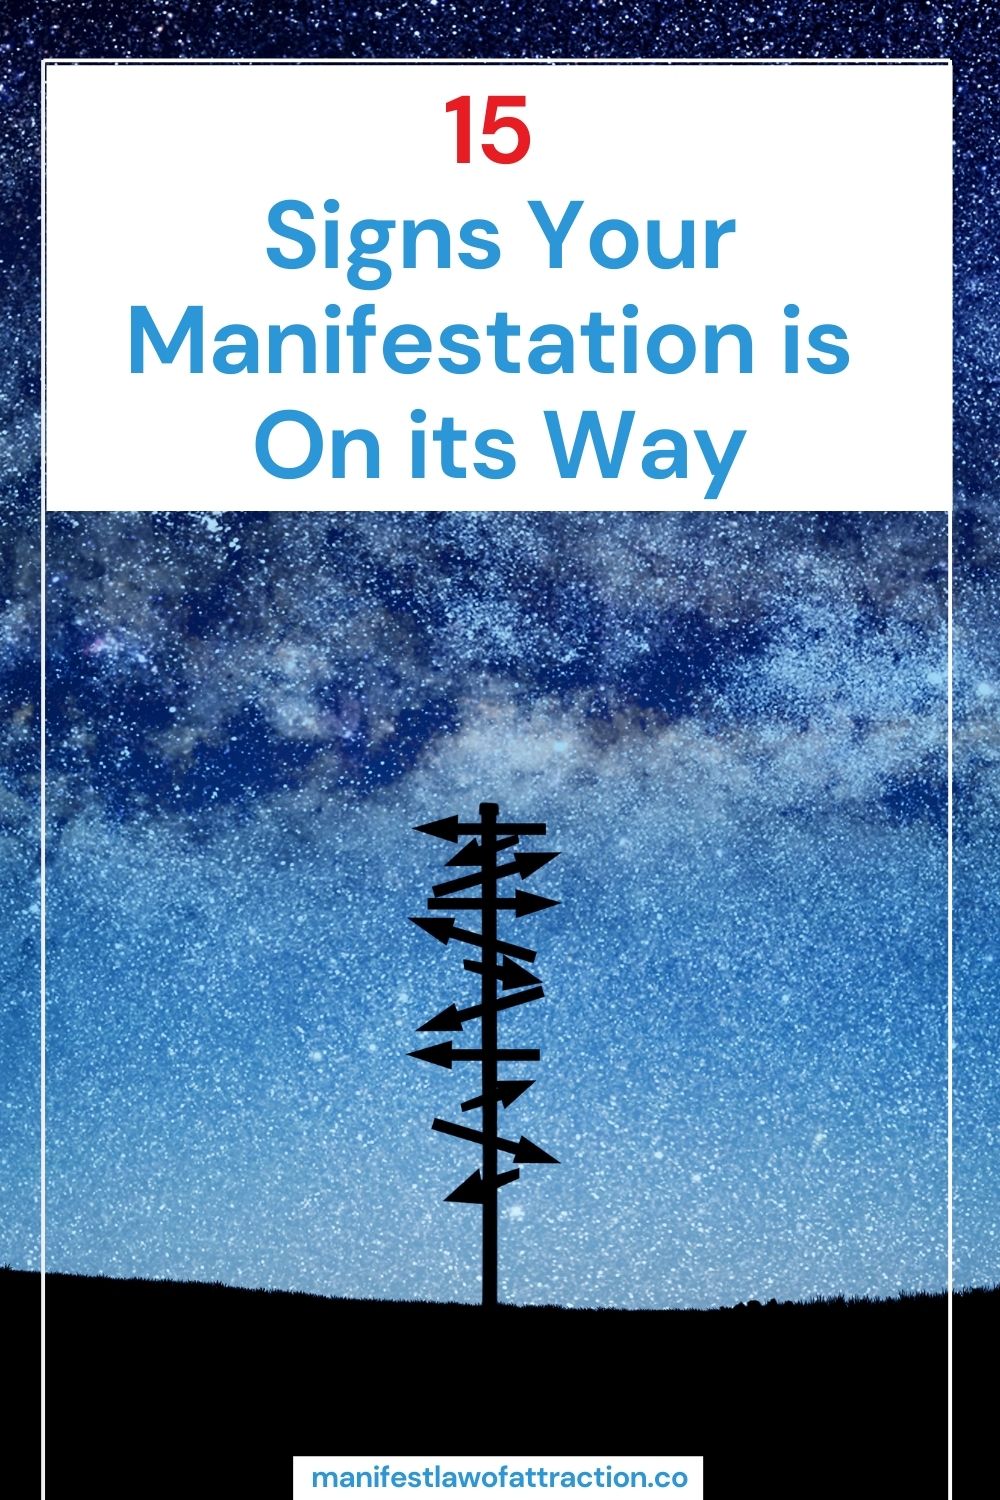 15 Signs Your Manifestation is On its Way (1)